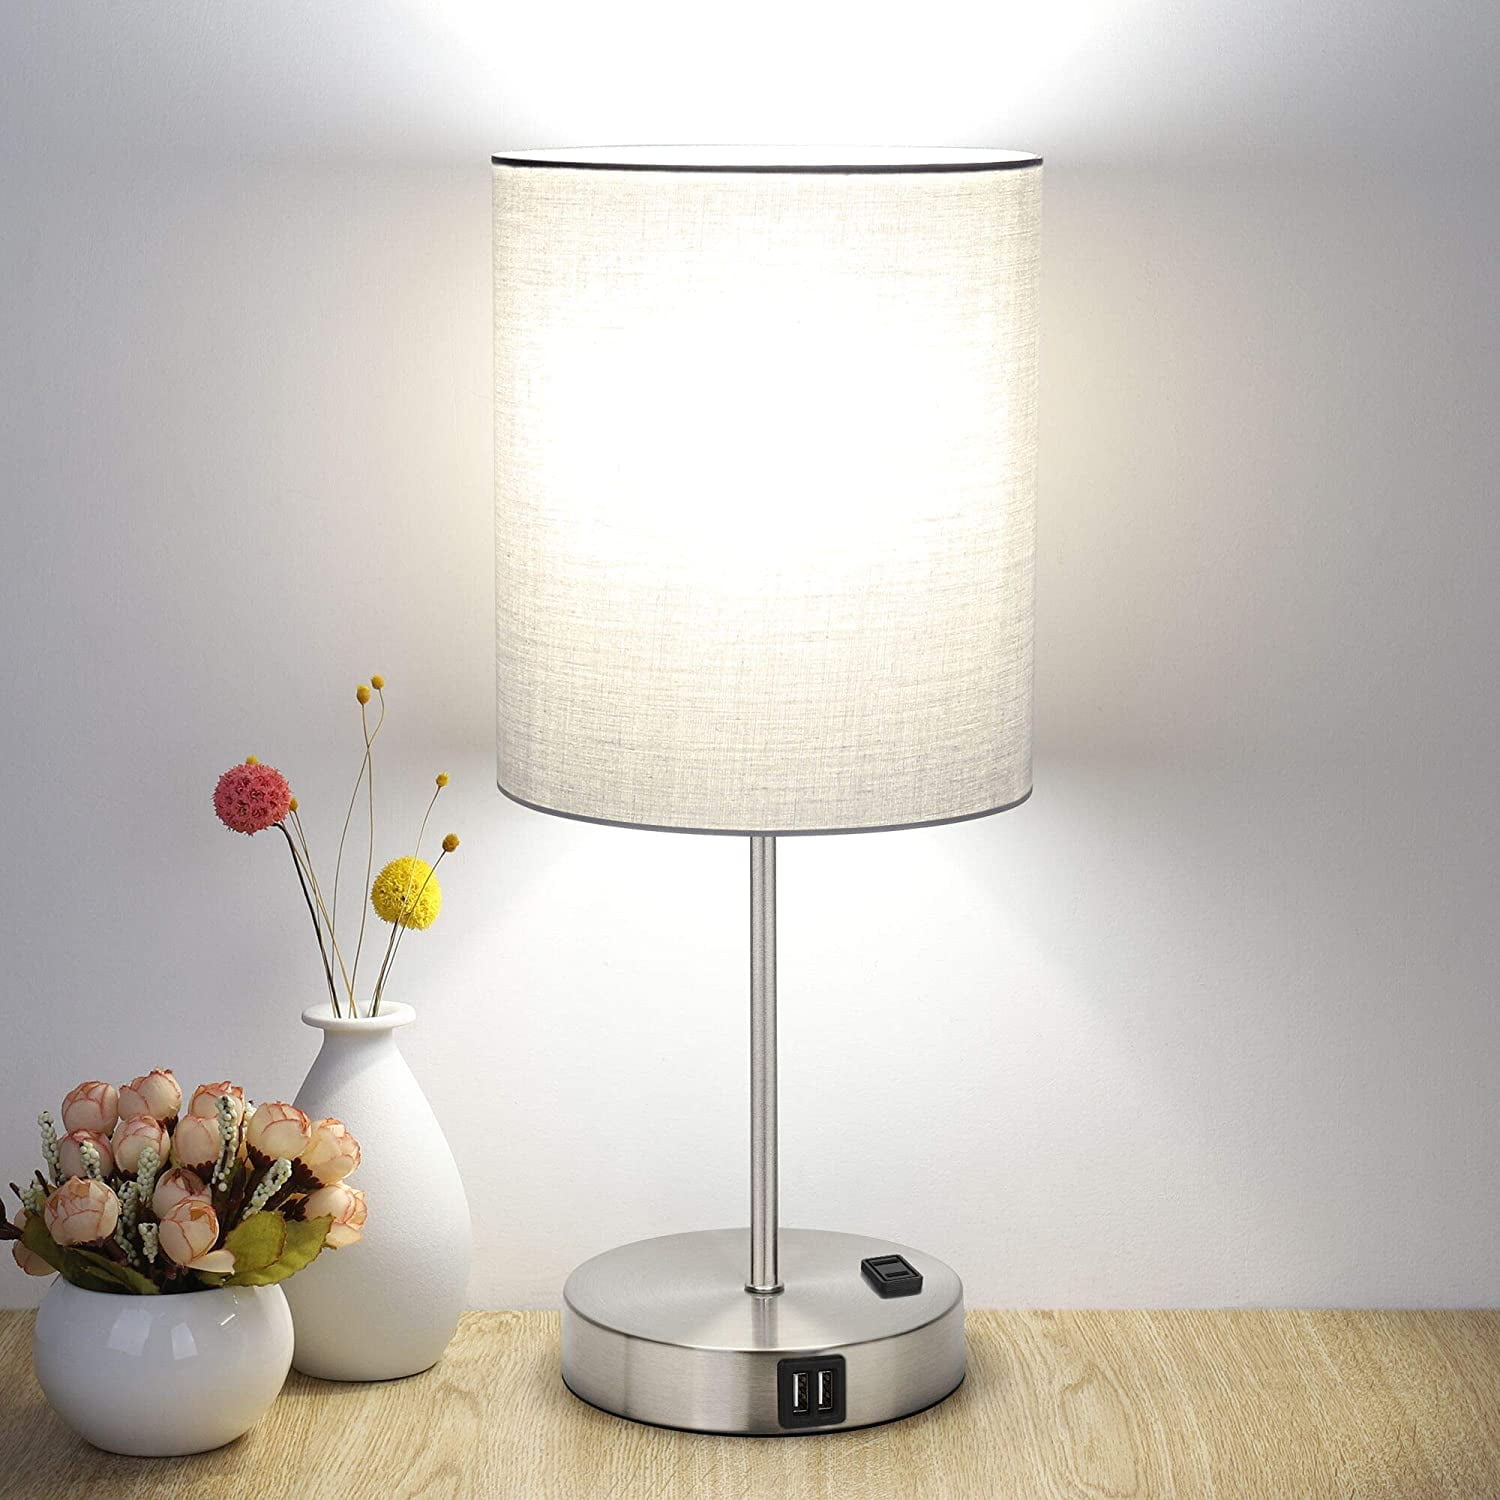 Bedside Lamp With Outlet And Usb - Touch Control Bedside Table Lamp 3